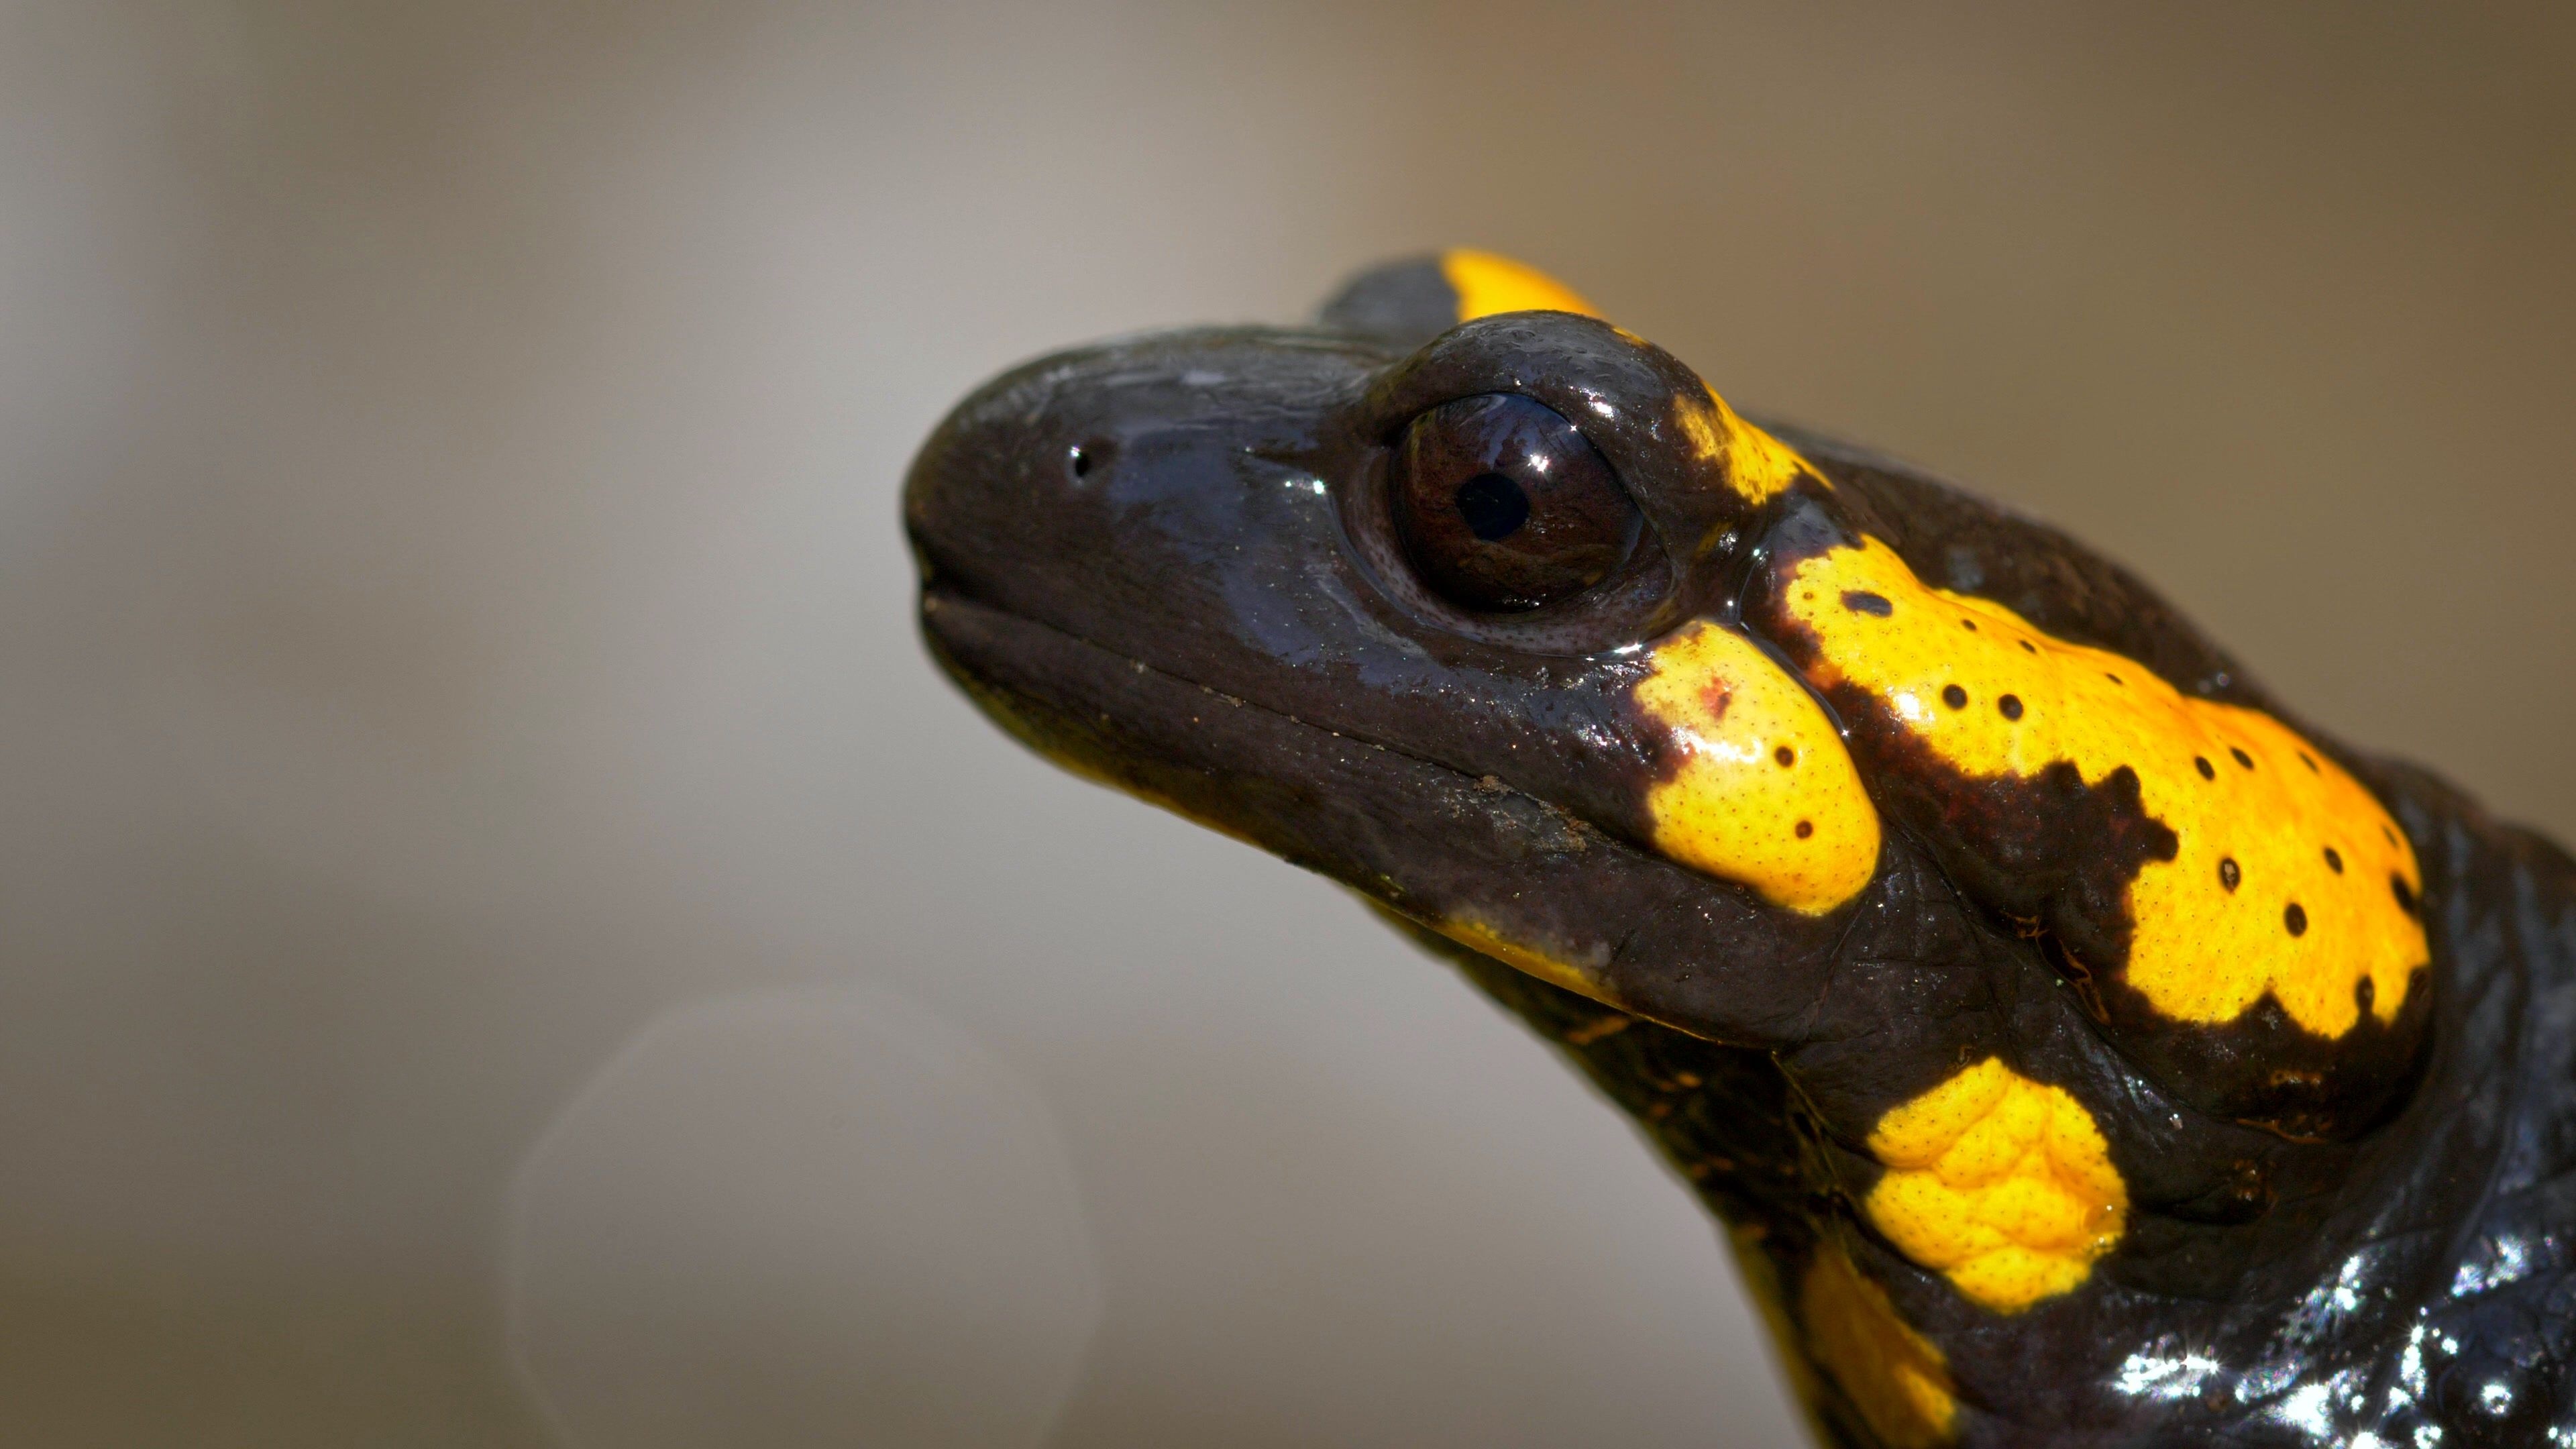 Reflections and thoughts, Pondering nature's wonder, Soulful connection with wildlife, Salamander imagery, 3840x2160 4K Desktop